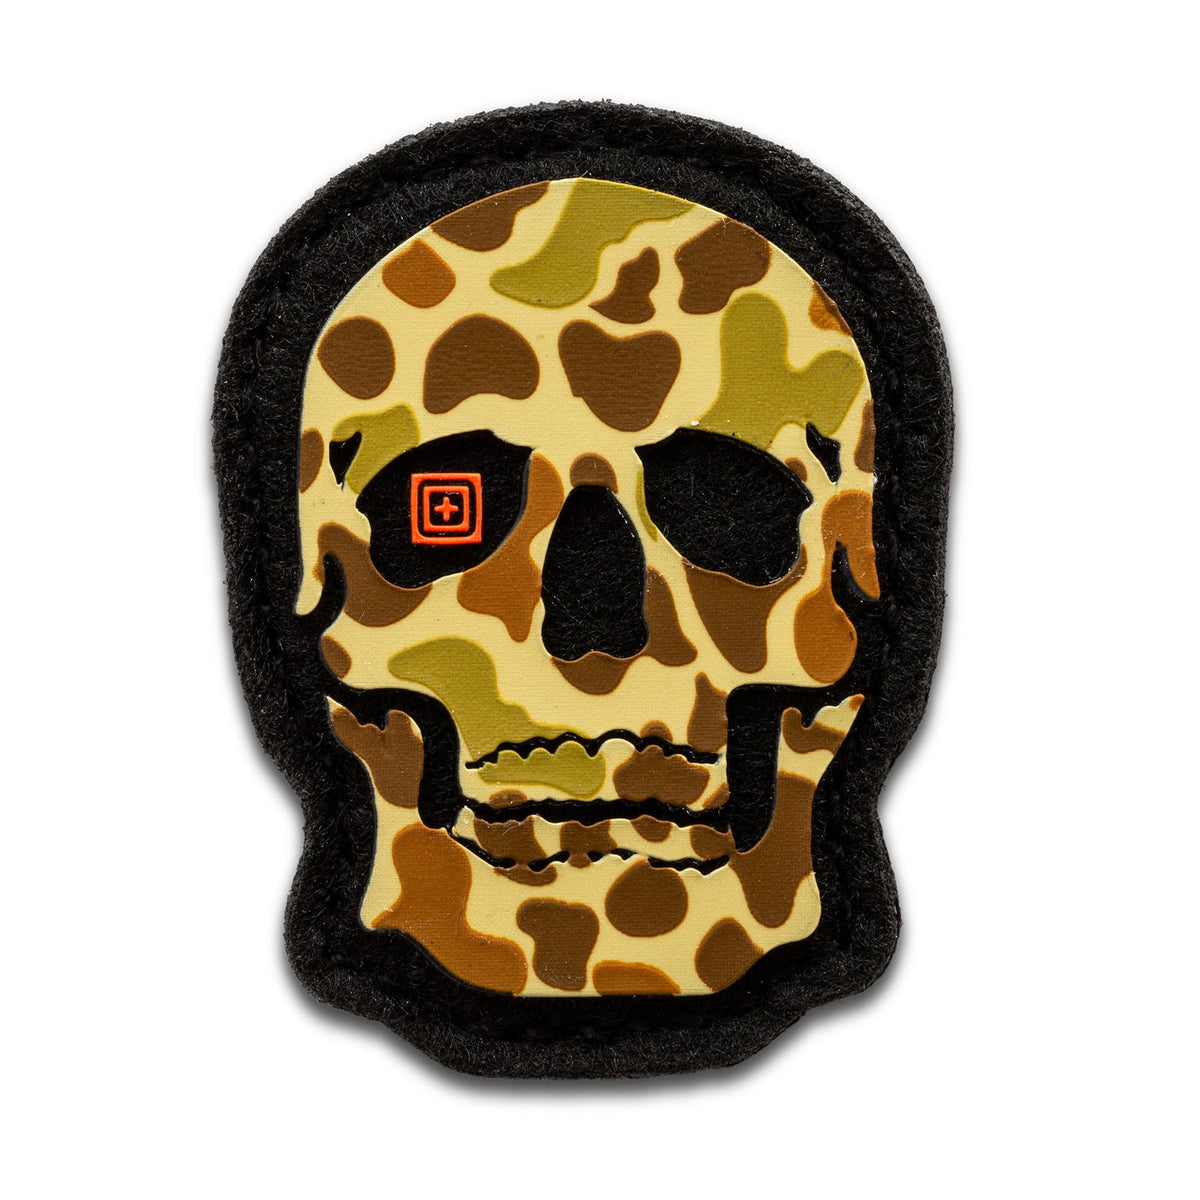 5.11 Tactical Skull Frog Camo Patch Accessories 5.11 Tactical Tactical Gear Supplier Tactical Distributors Australia